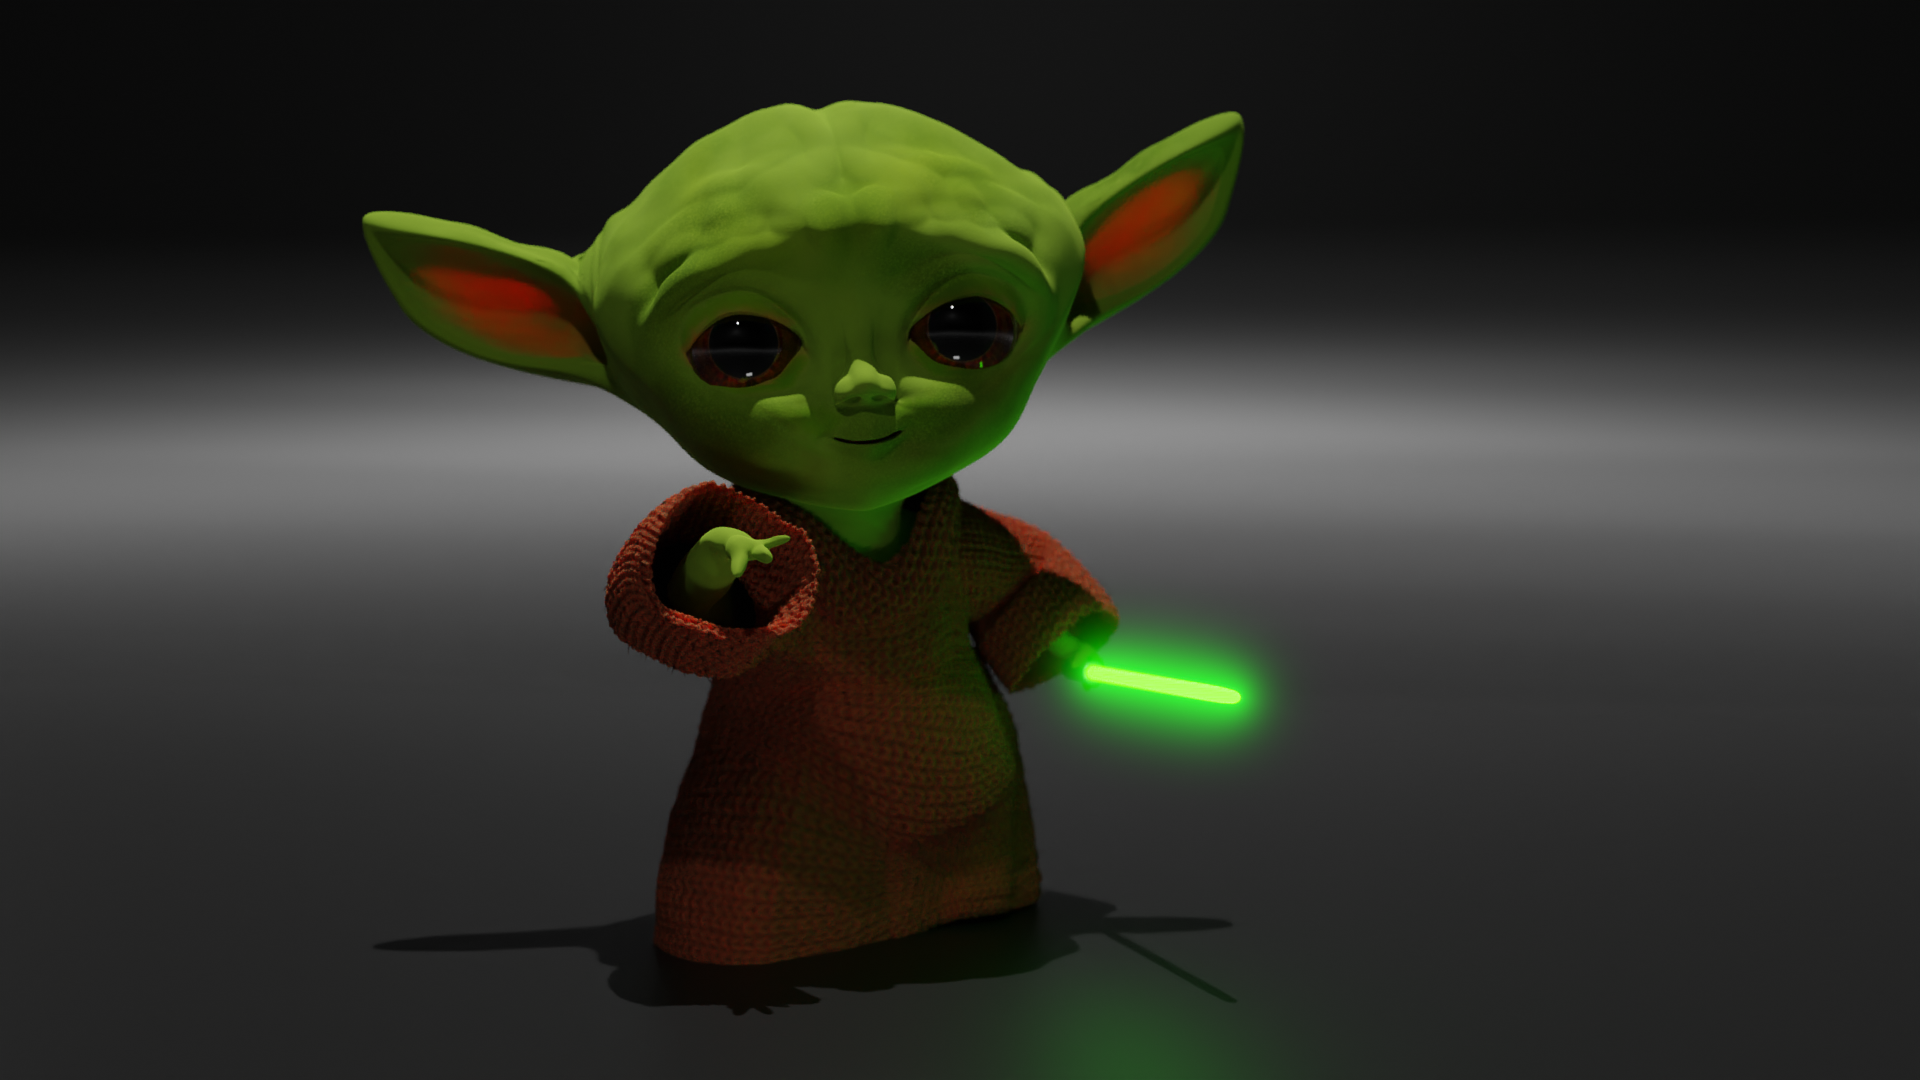 Toddler Yoda revised February 2020 by Blender CGI preview image 1